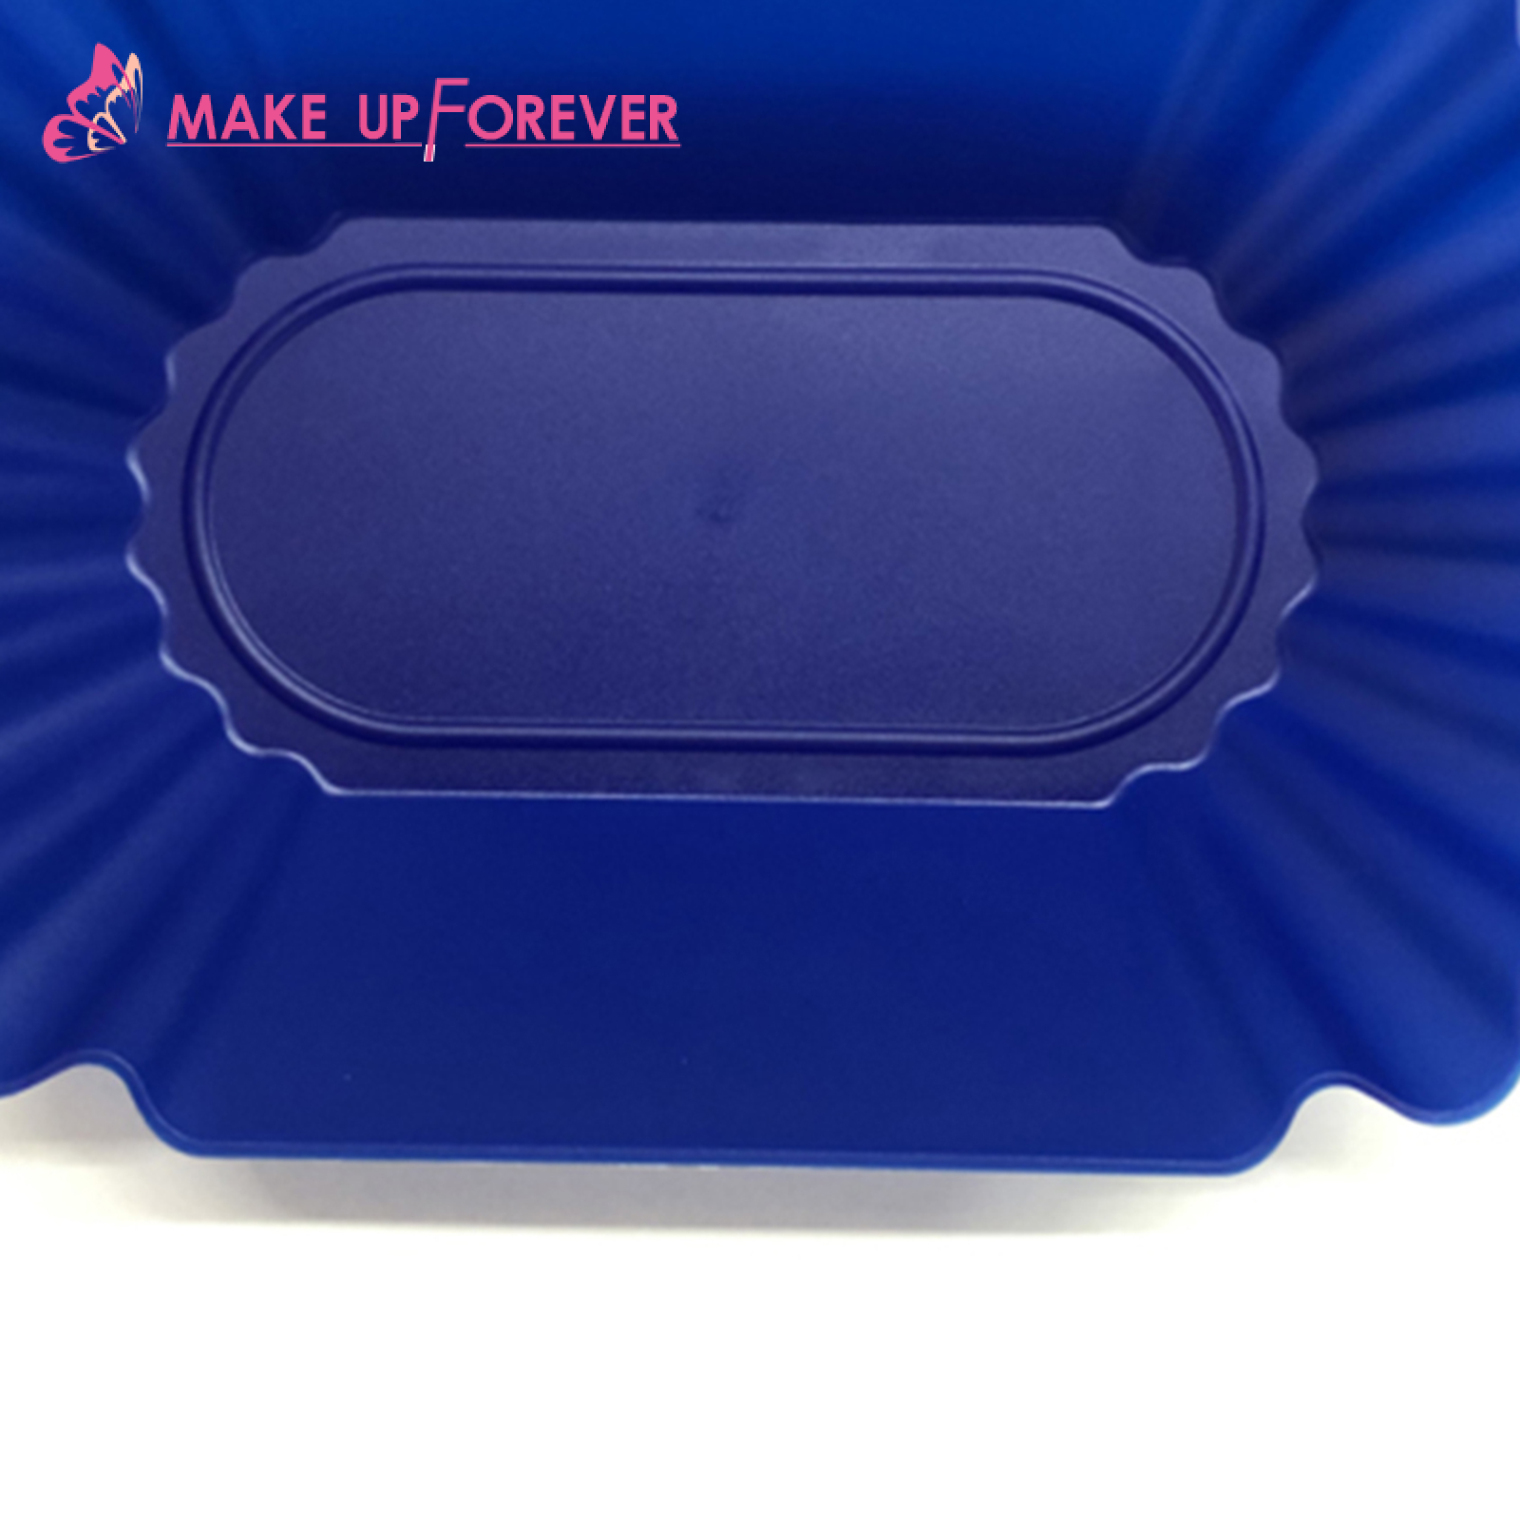 [Make_up Forever]Plastic Plate Snack Serving Tray Oval Coffee Bean Tray Snack Plate Green